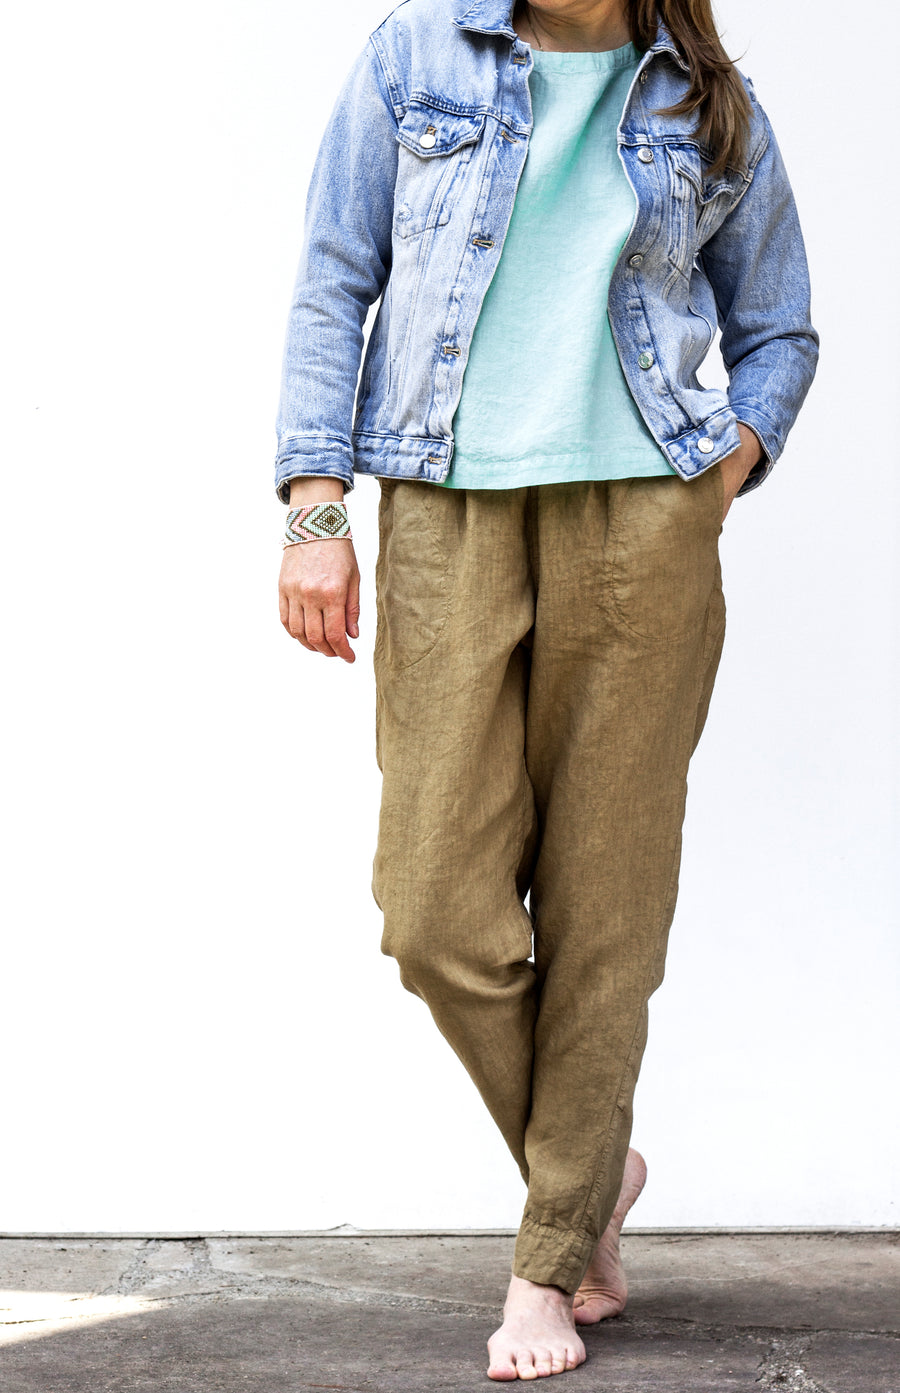 Extra fine trousers in Olive Gray shade